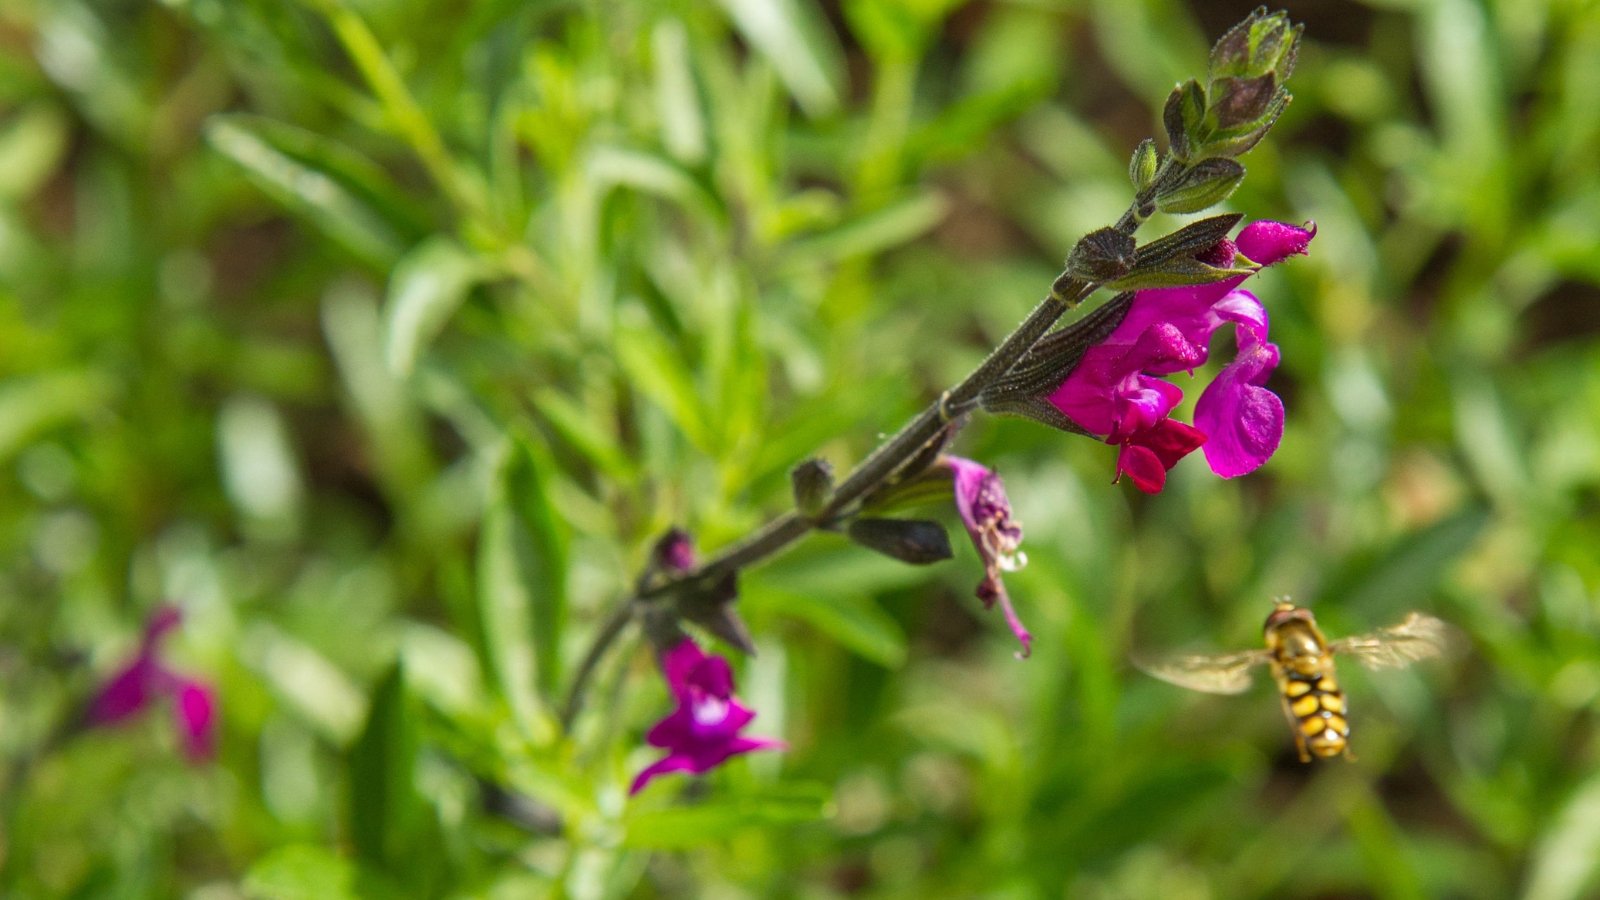 Close-up of a bee hovering next to a Salvia greggii flower inflorescence consisting of tubular flowers in a bright pink-violet hue.